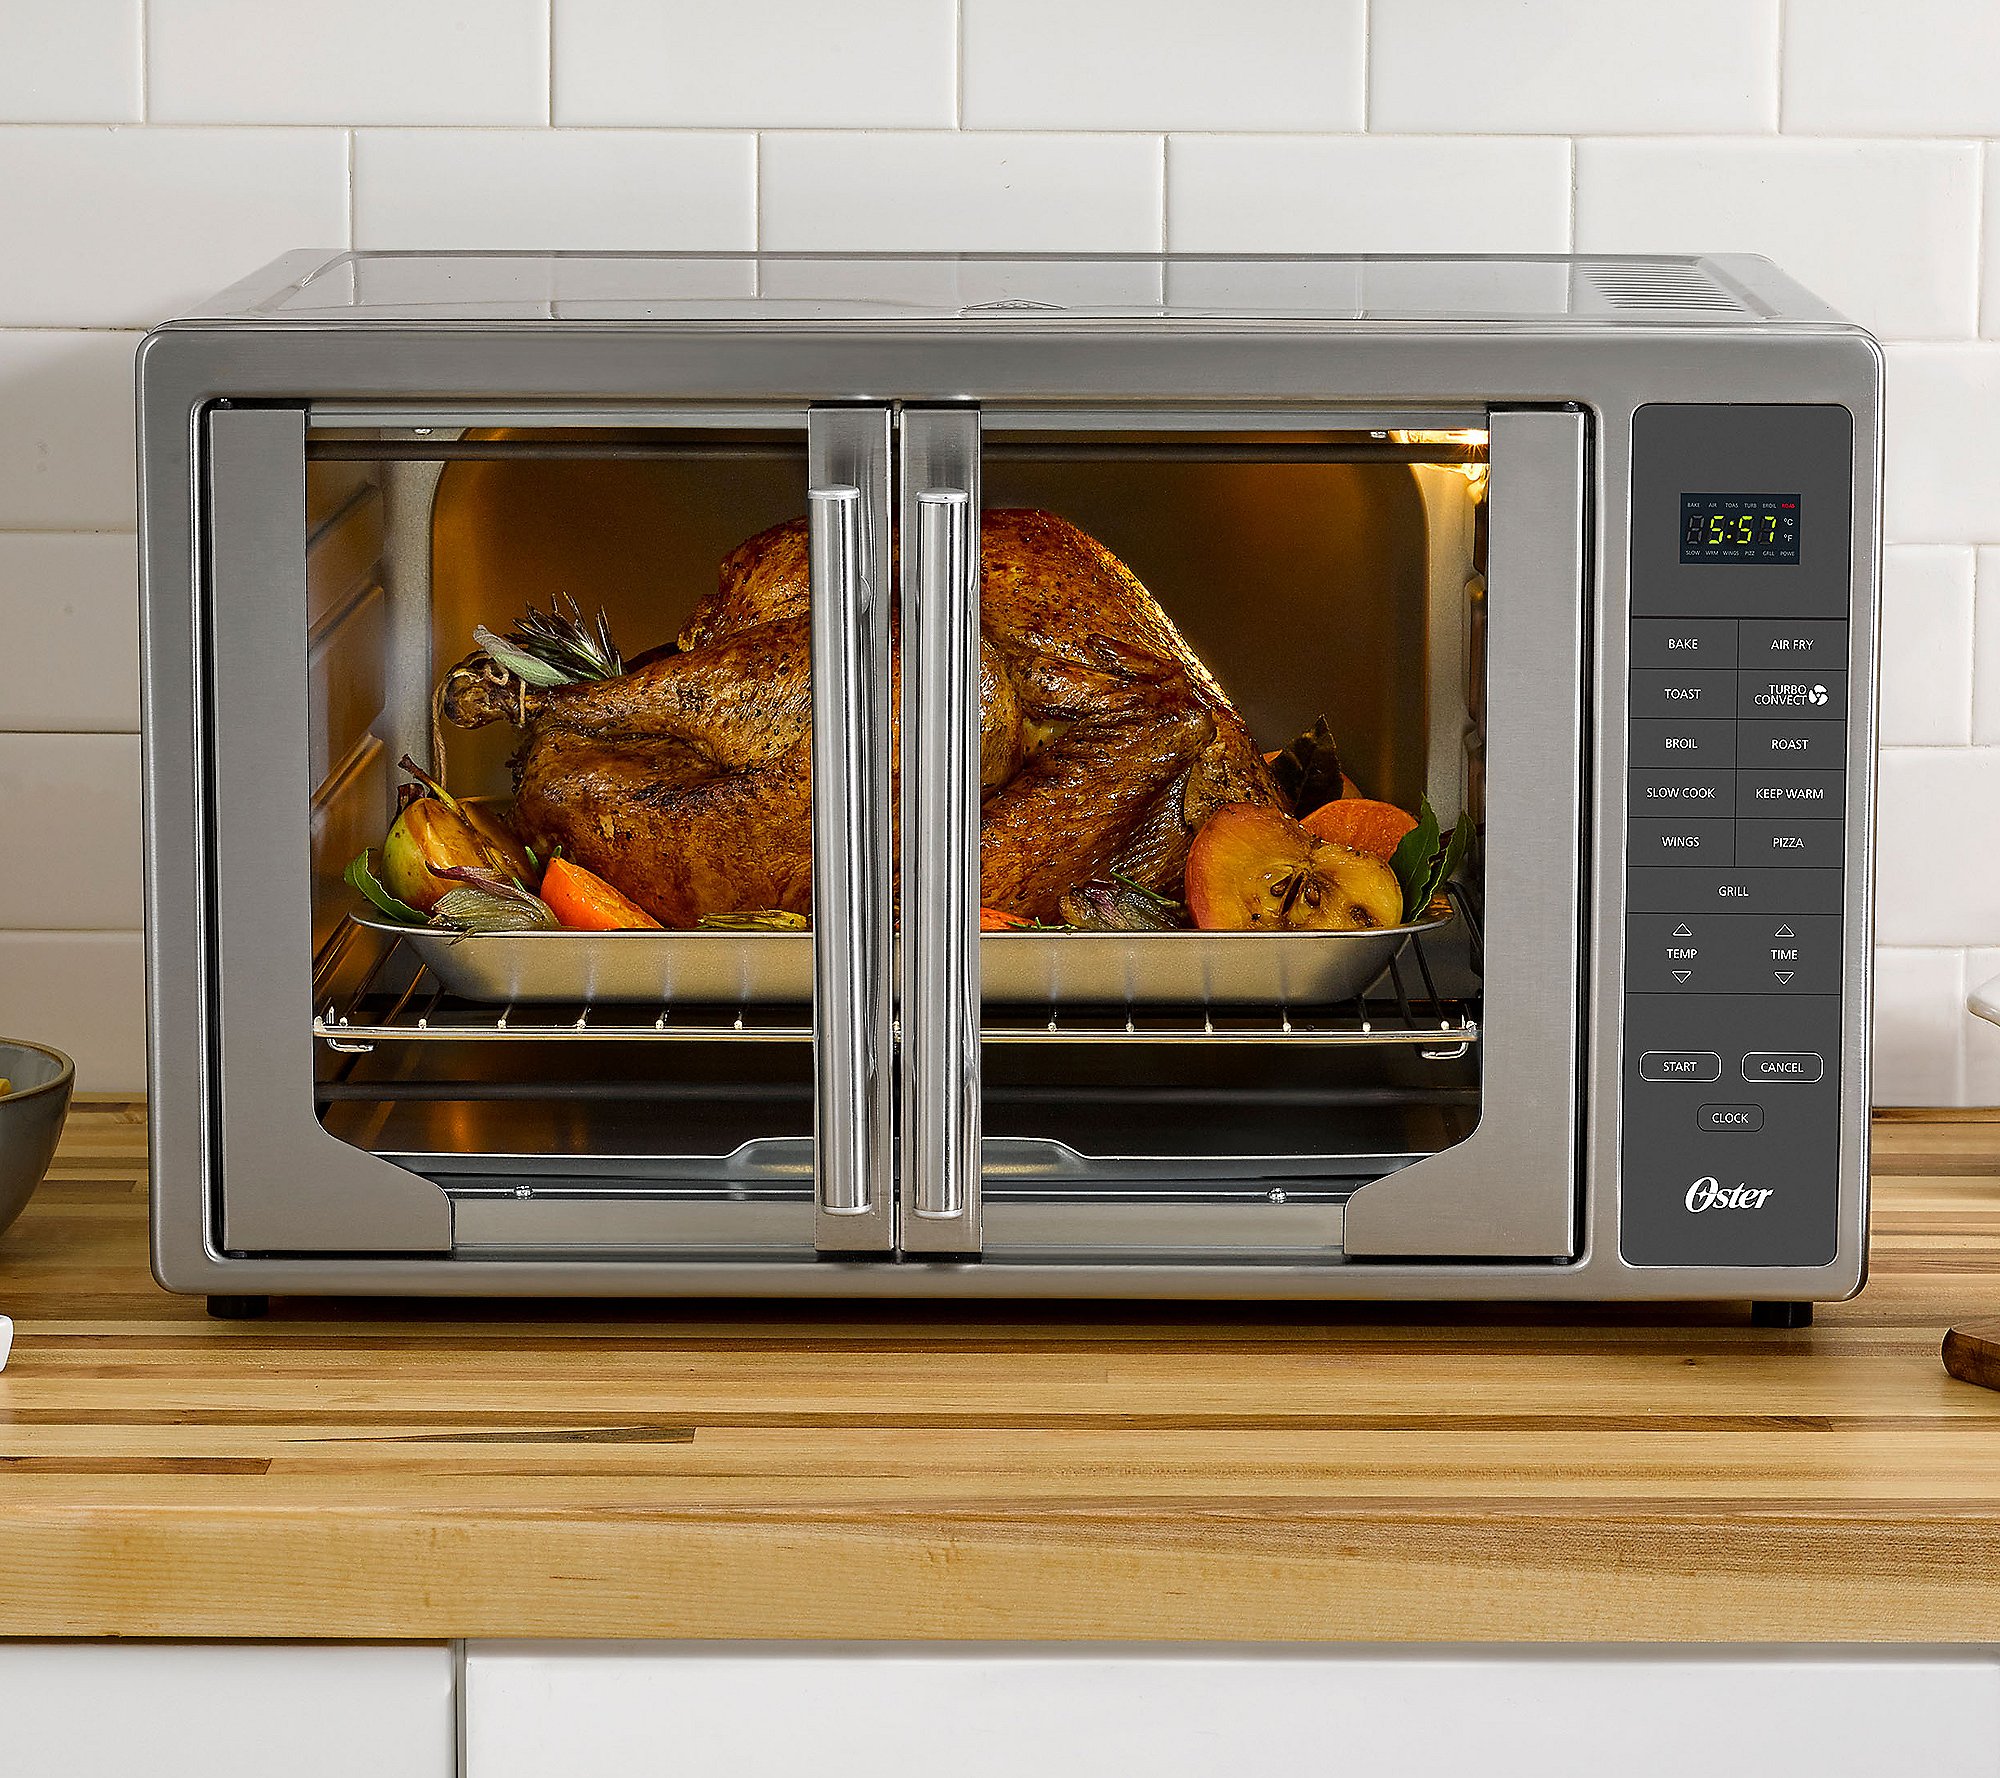 What is a convection oven and how to cook in one - Reviewed